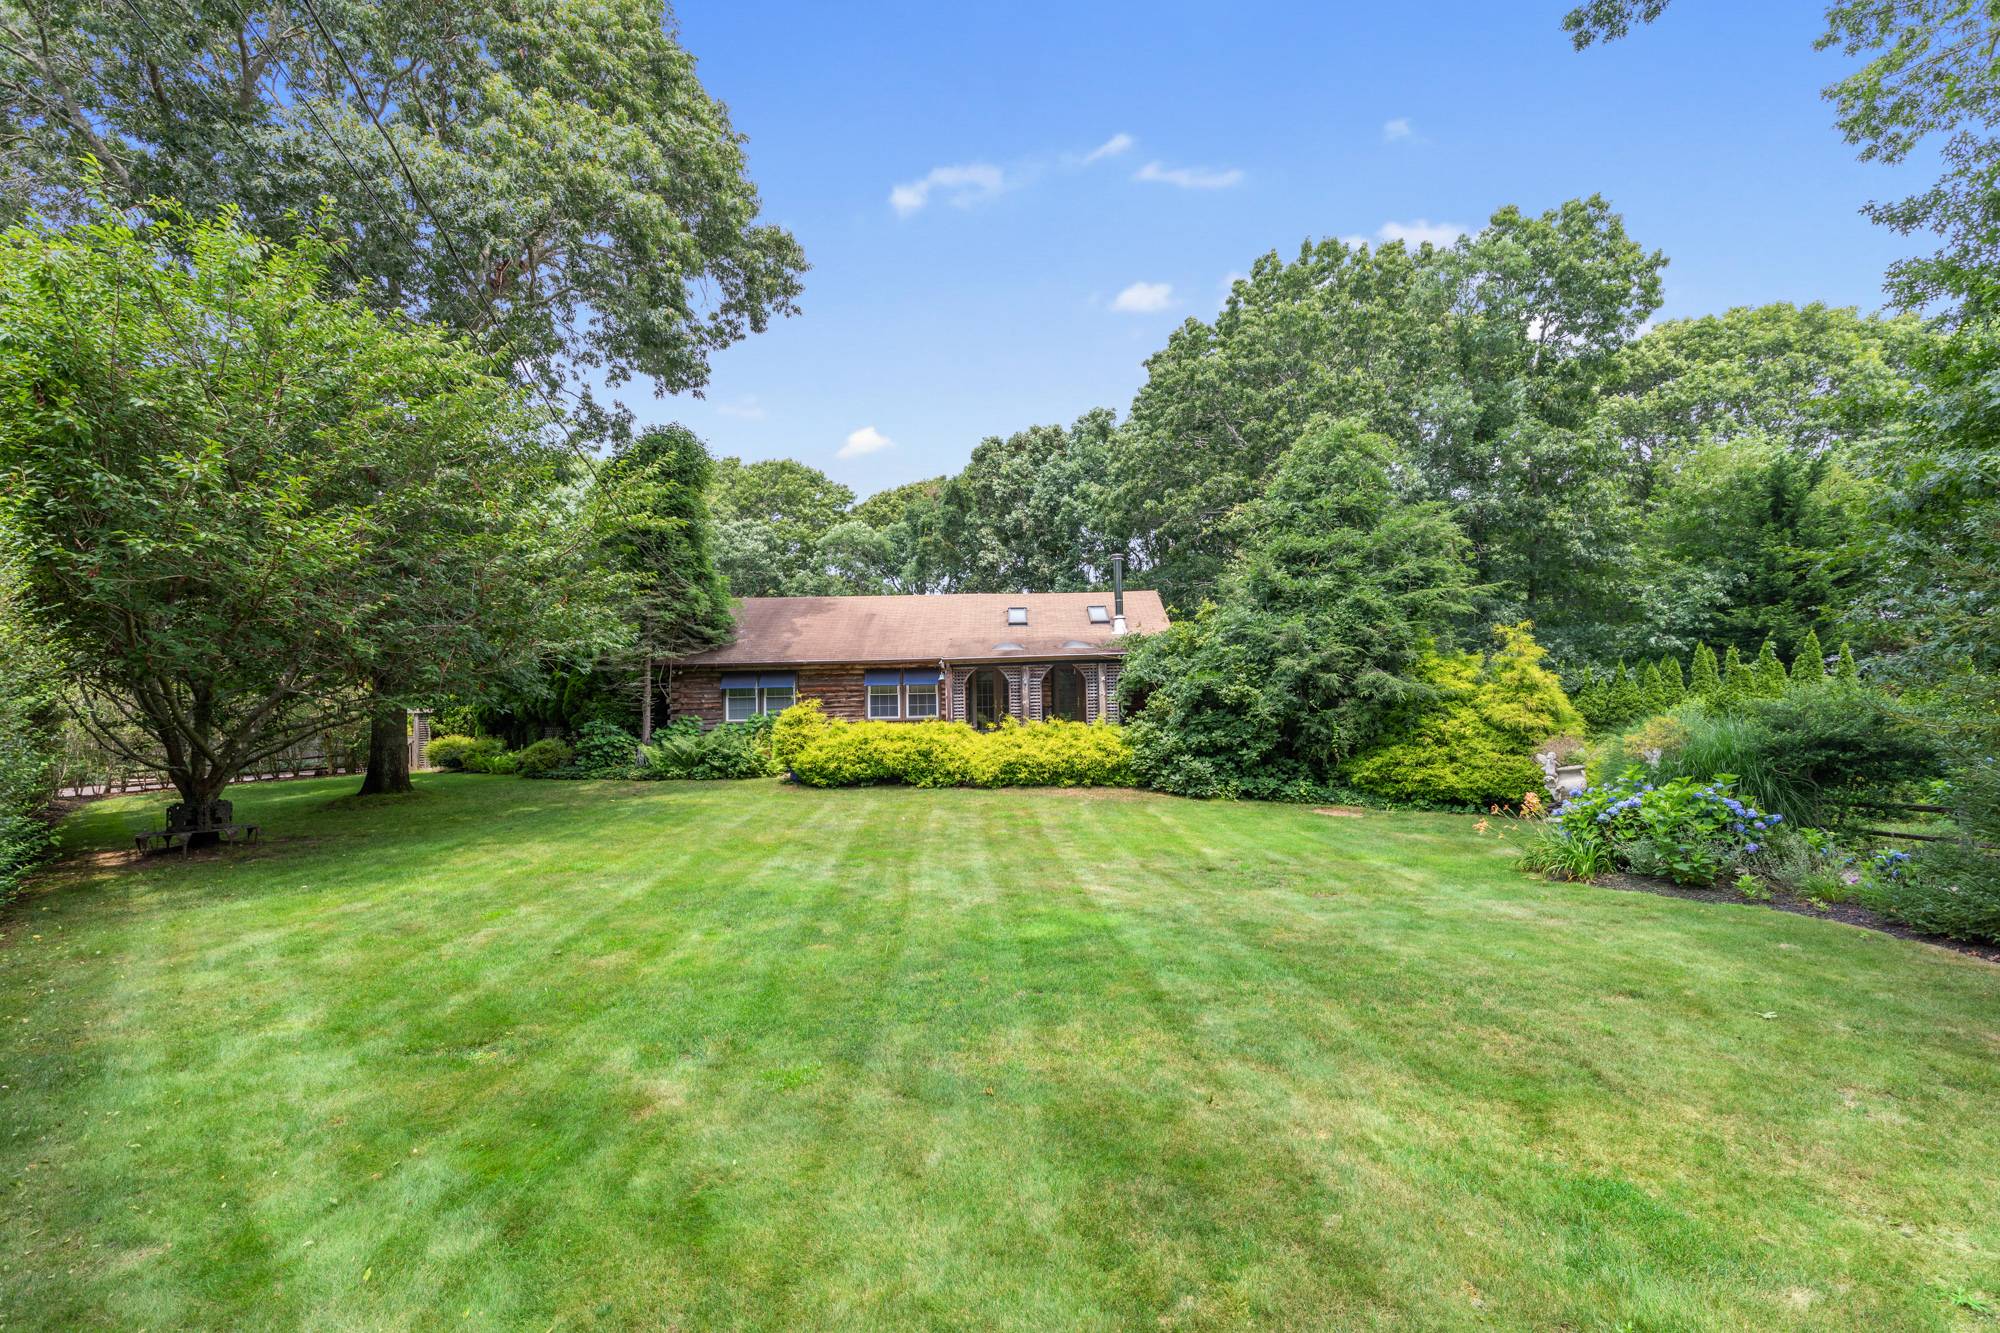 BEAUTIFUL EAST HAMPTON HOME READY TO MOVE IN OR RENT!